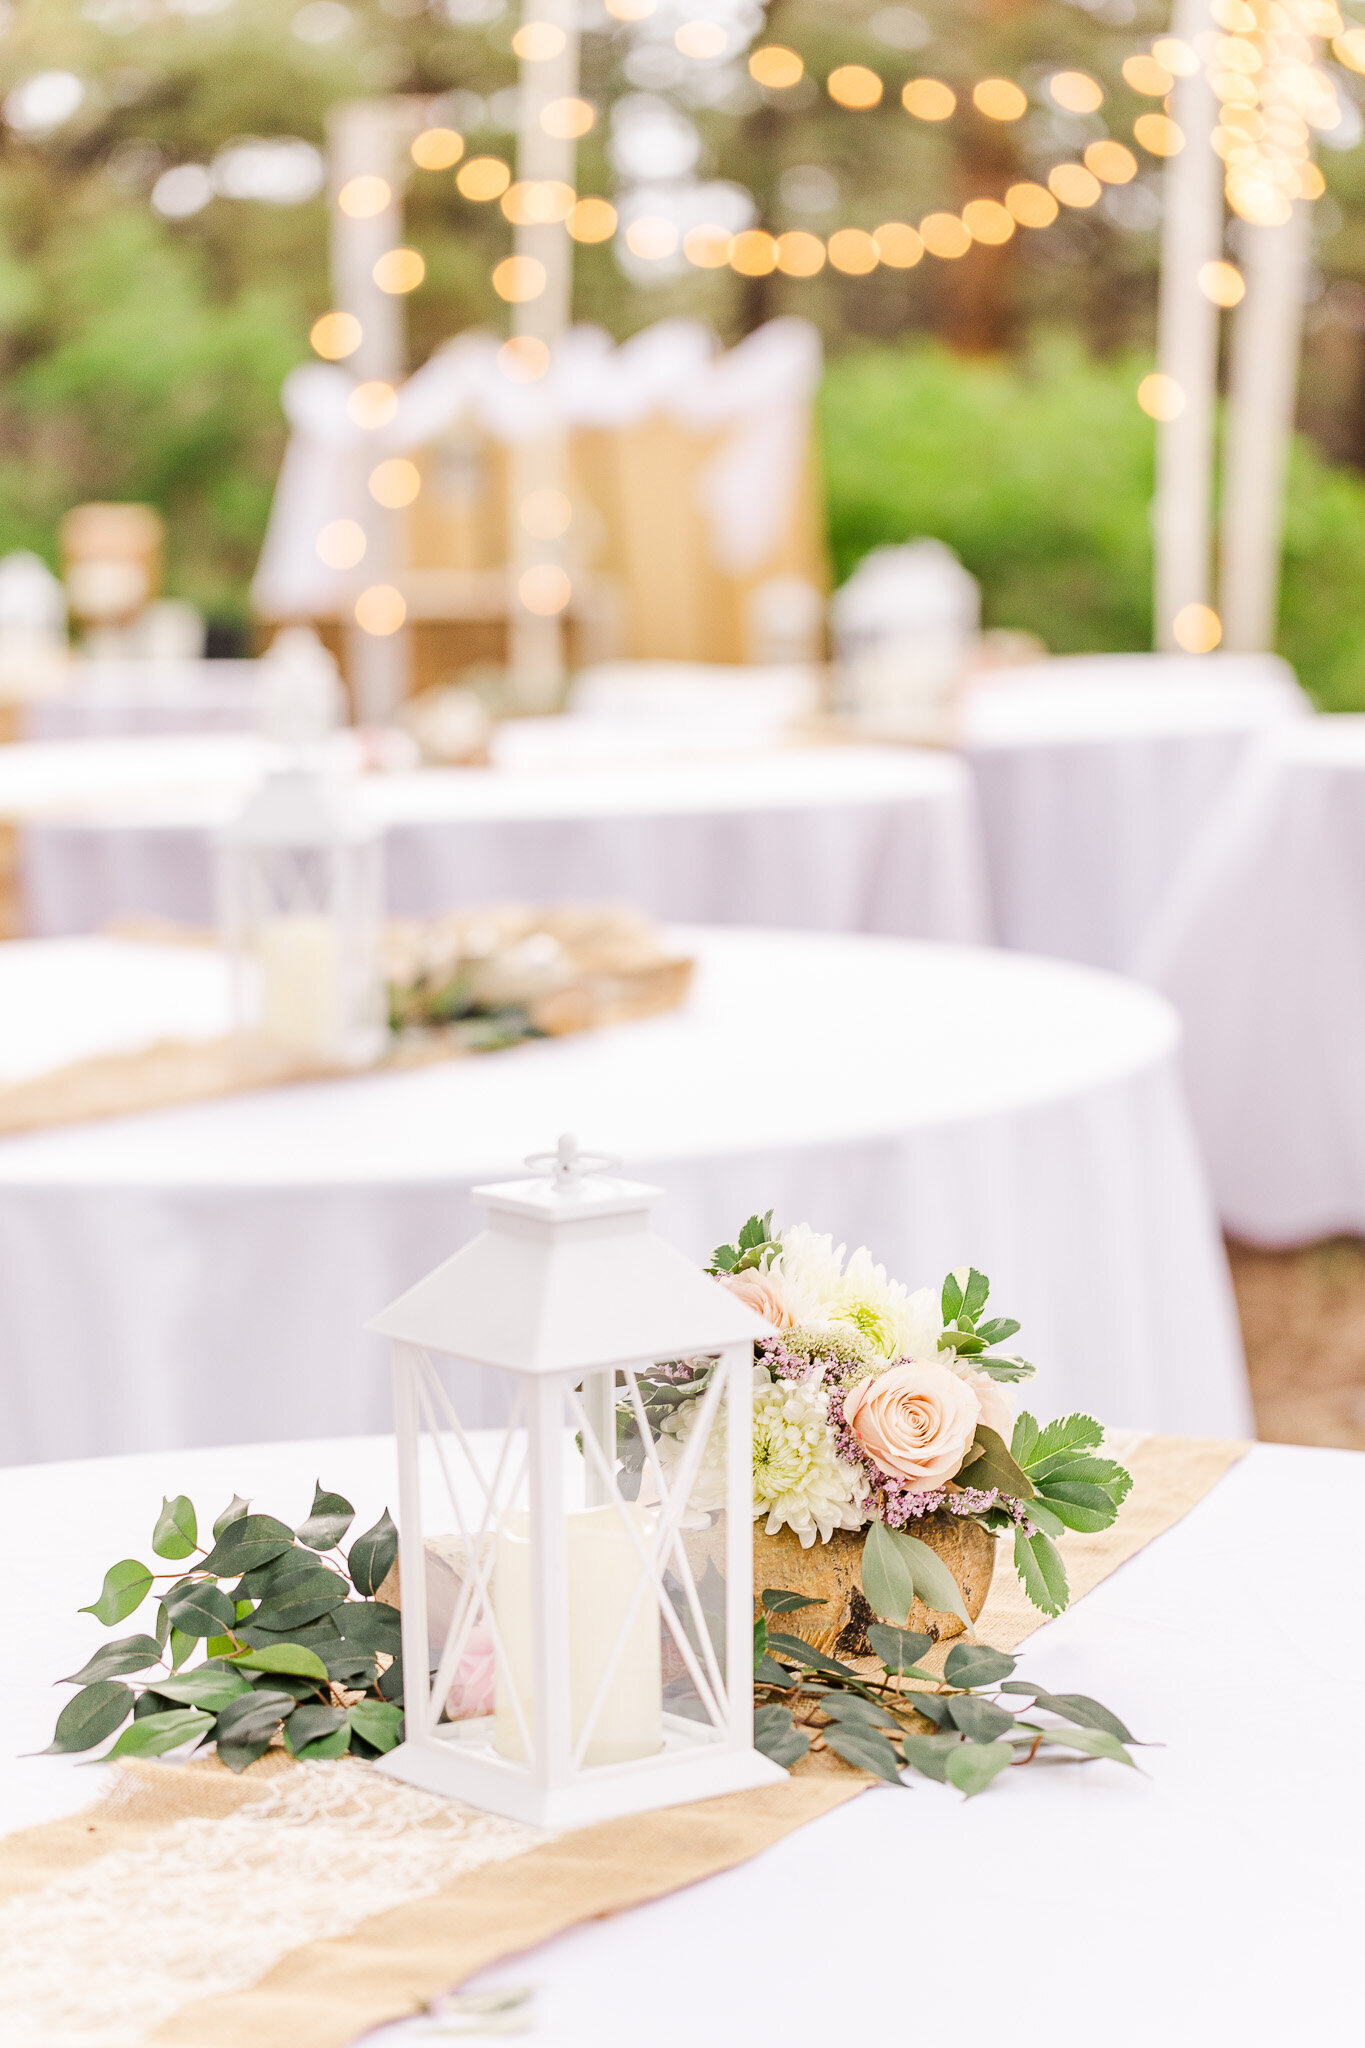 Lantern and florals on burlap on the wedding table